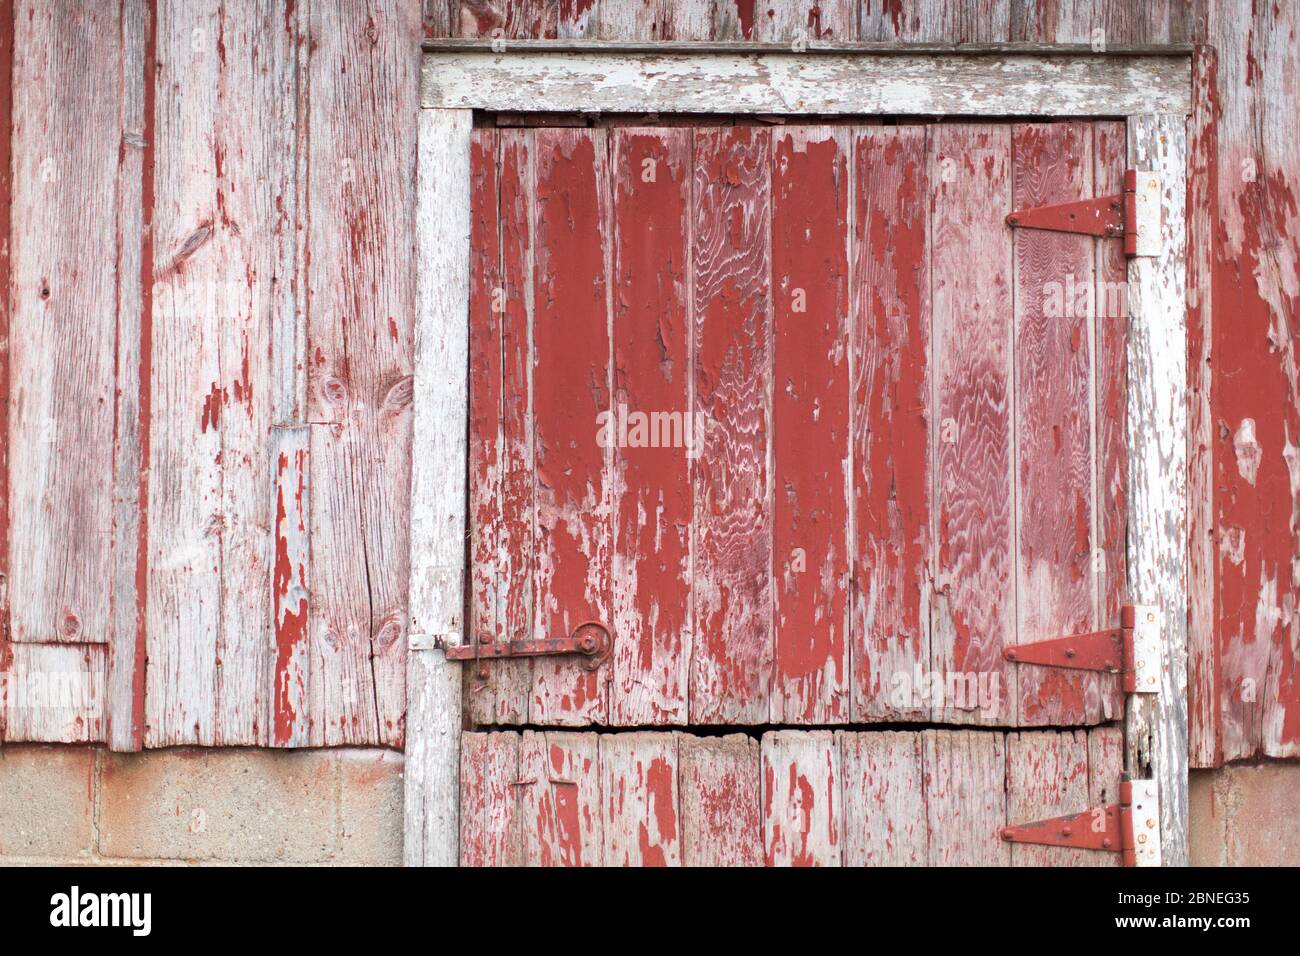 Barn door close up, weathered wood with red paint Stock Photo